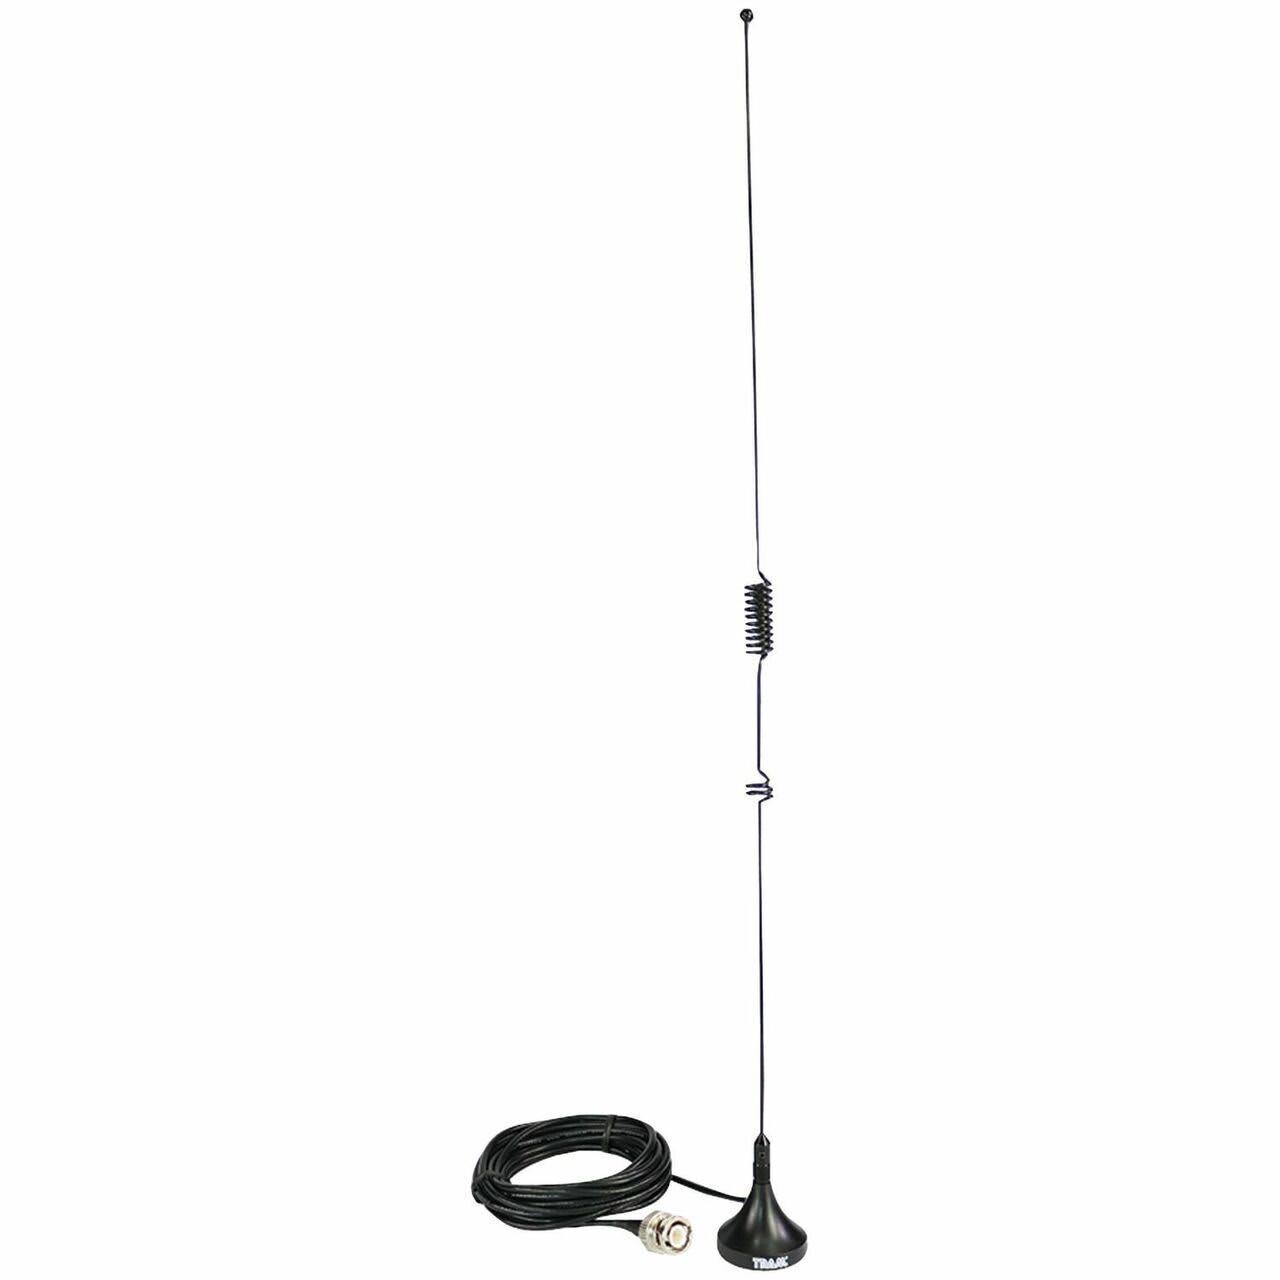 Tram 1089-BNC Scanner Mini-Magnet Antenna VHF-UHF-800MHz-1,300MHz with BNC-Male Connector